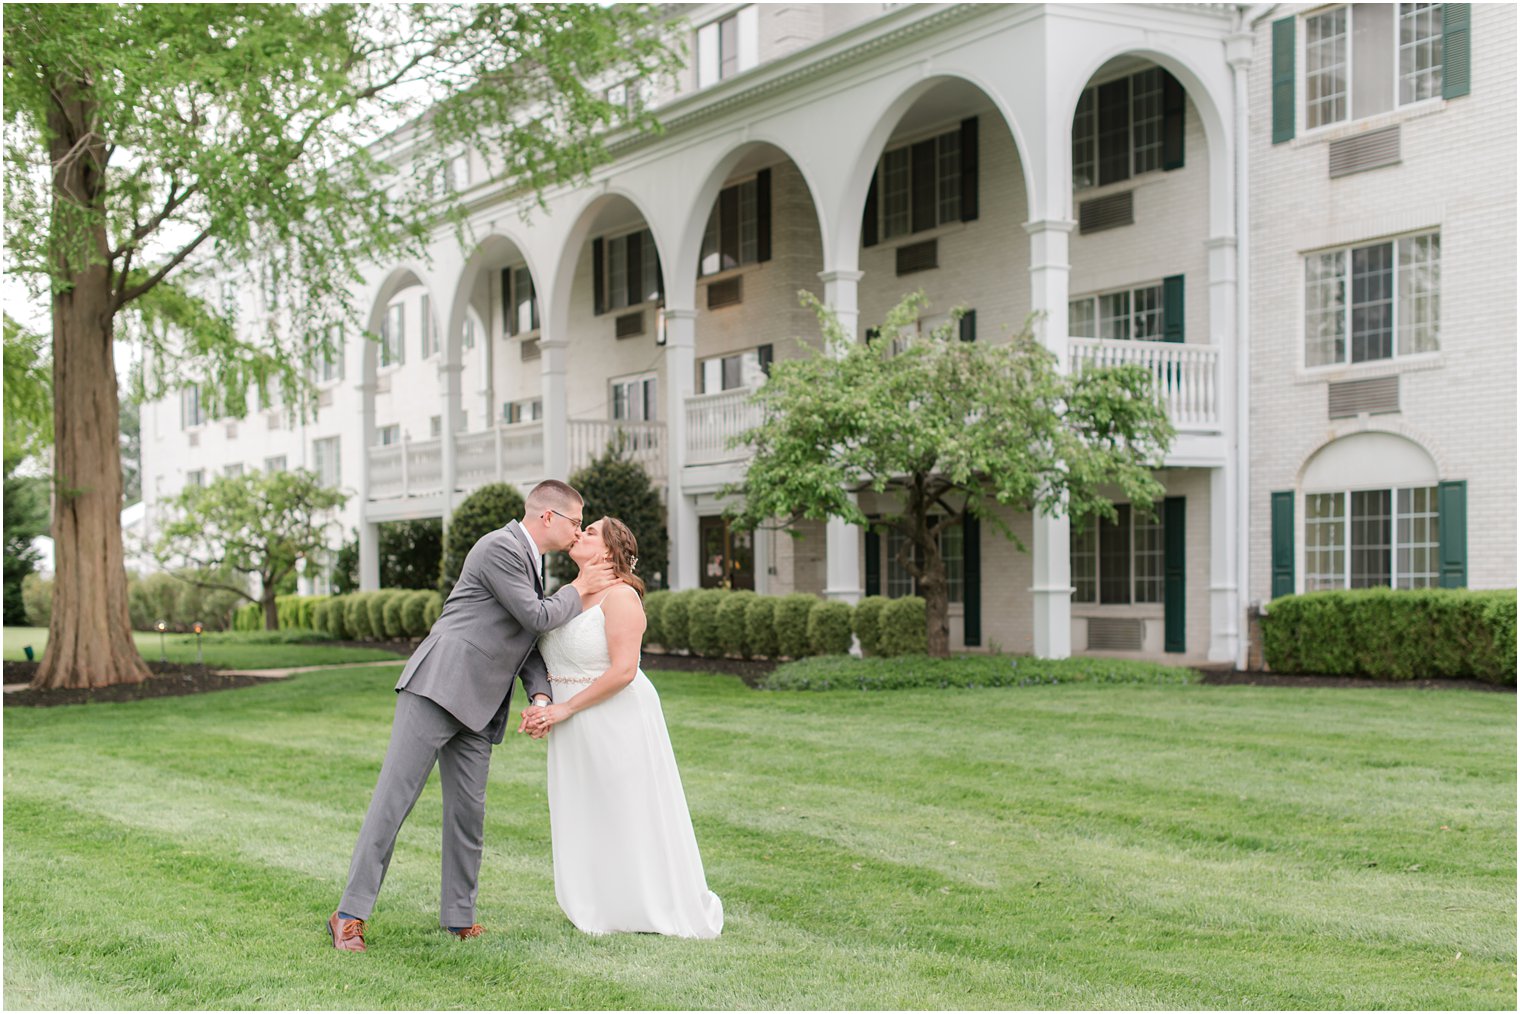 groom kisses bride during New Jersey wedding photos in front of white historic hotel